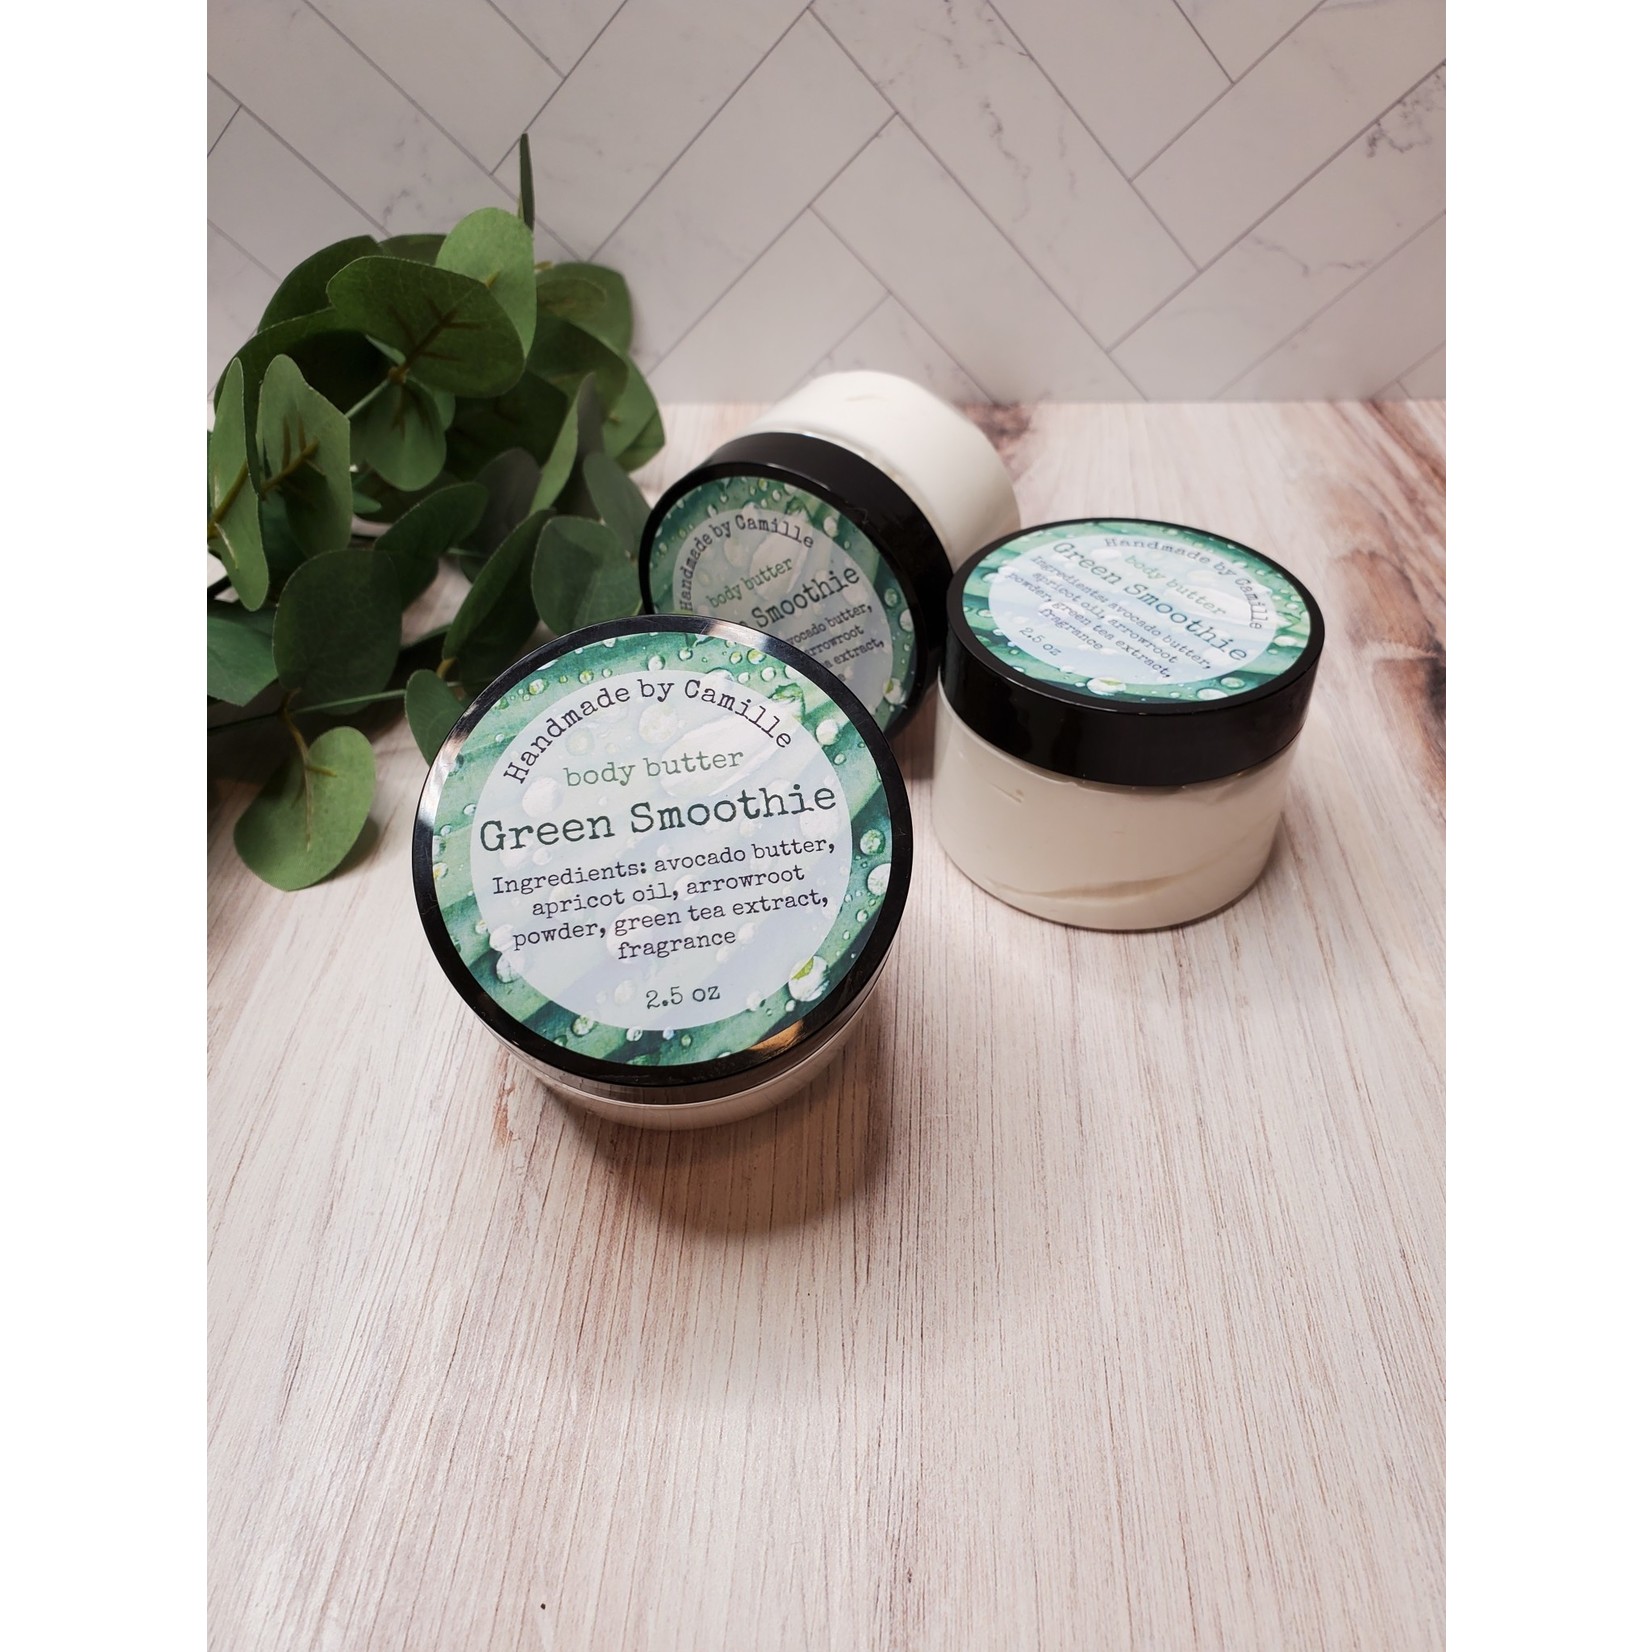 Handmade by Camille Body Butter - Green Smoothie